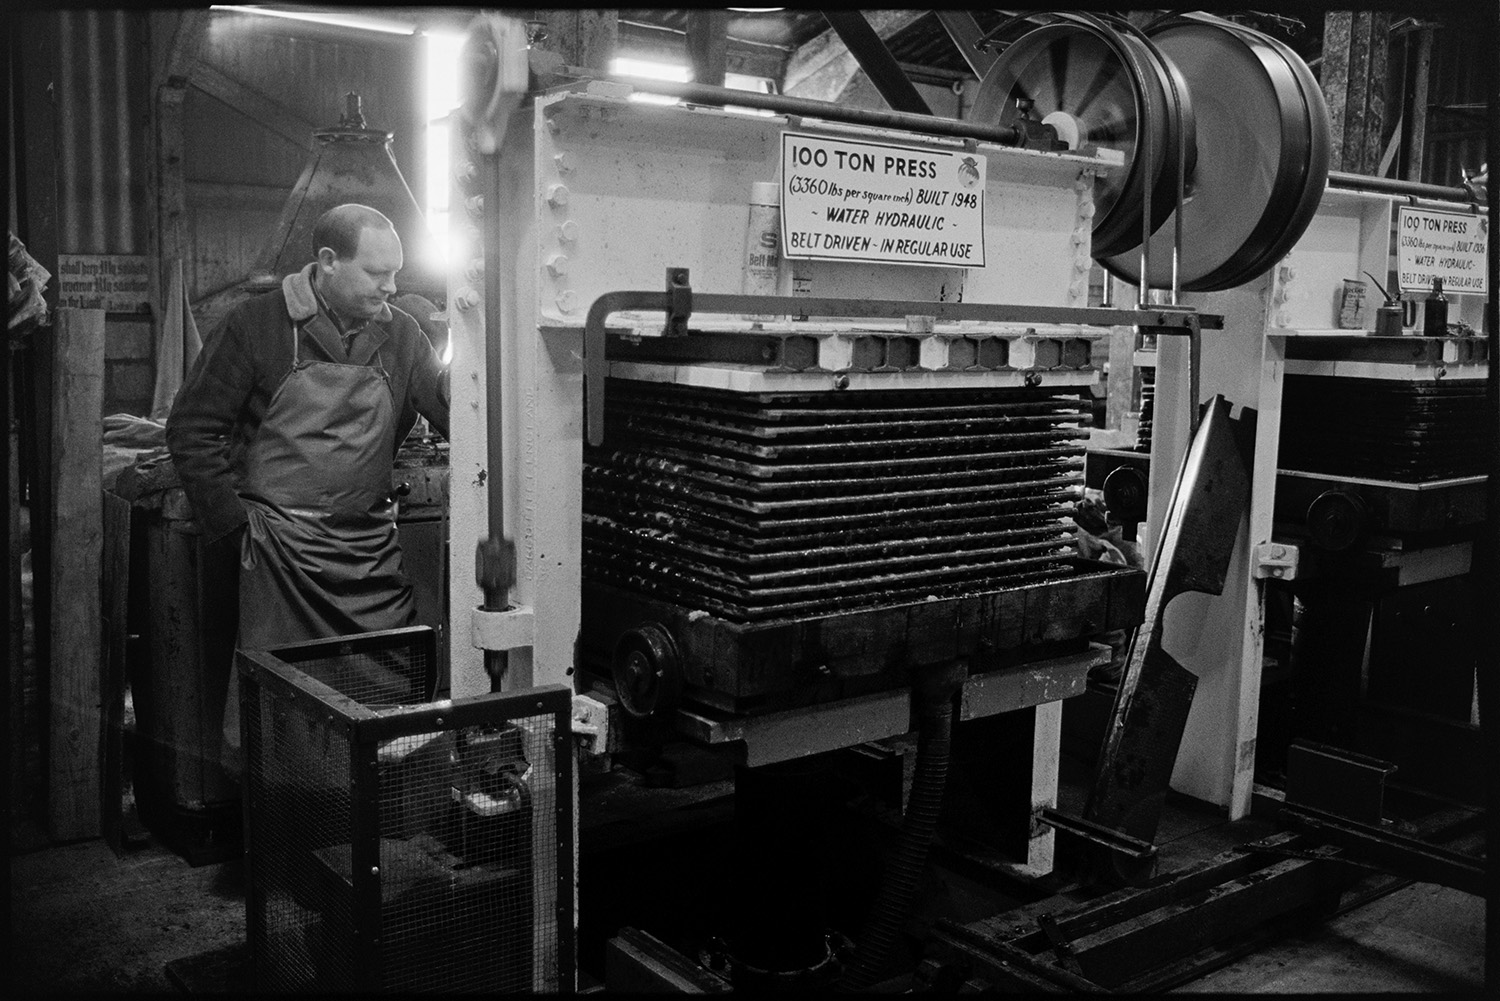 Cider making, men operating cider press in factory. 
[A man working a 100 ton cider press built in 1948, at Hancock's cider factory at Clapworthy Mill, South Molton.]